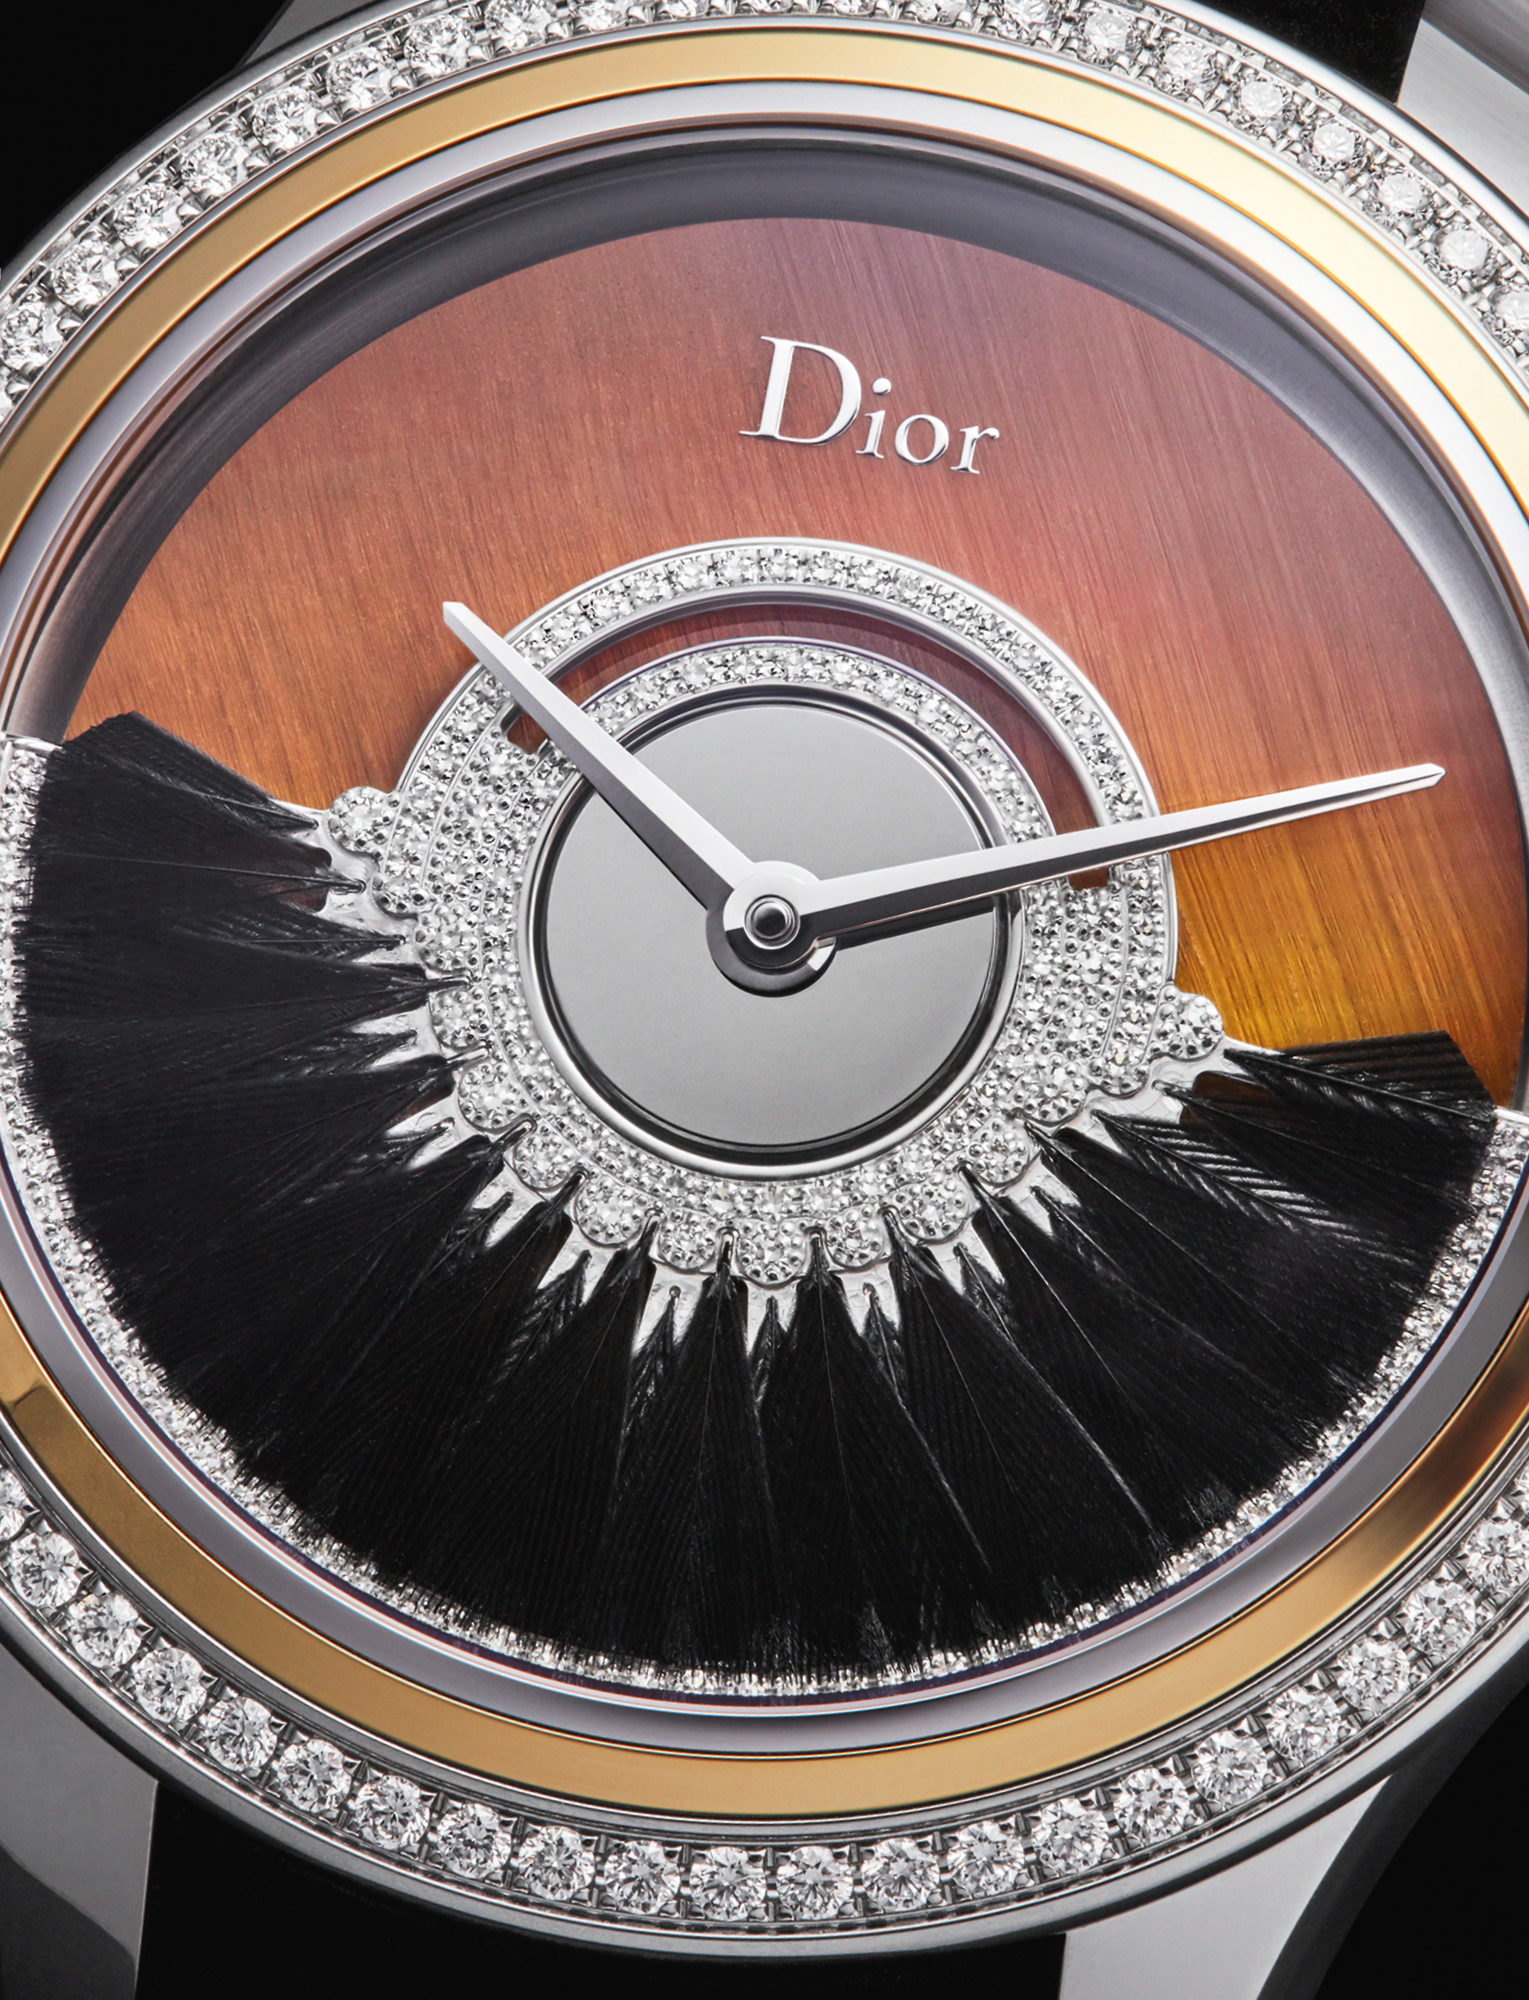 Dior’s 36mm Grand Bal Plume has an automatic movement featuring black feathers set on an oscillating weight recreating the swirl of a ball gown. It features a tiger’s eye stone dial with diamonds and is limited to 88 pieces. £23,600, DIOR